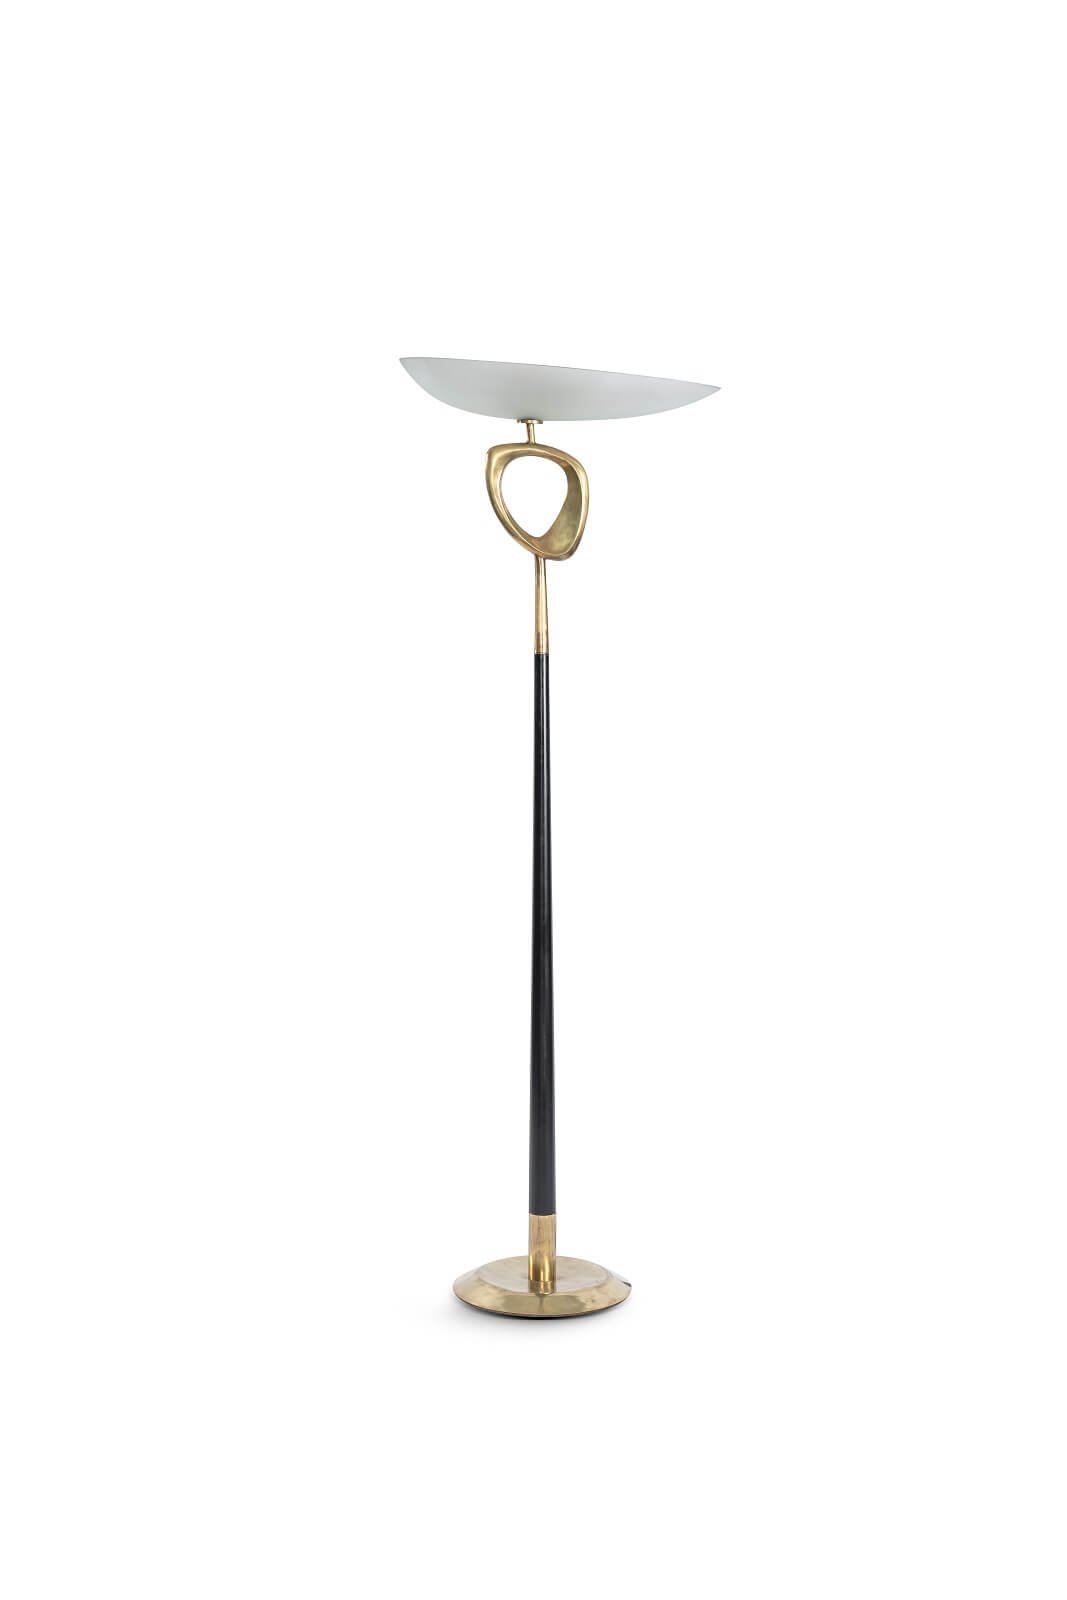 Floor lamp by Max Ingrand for sale